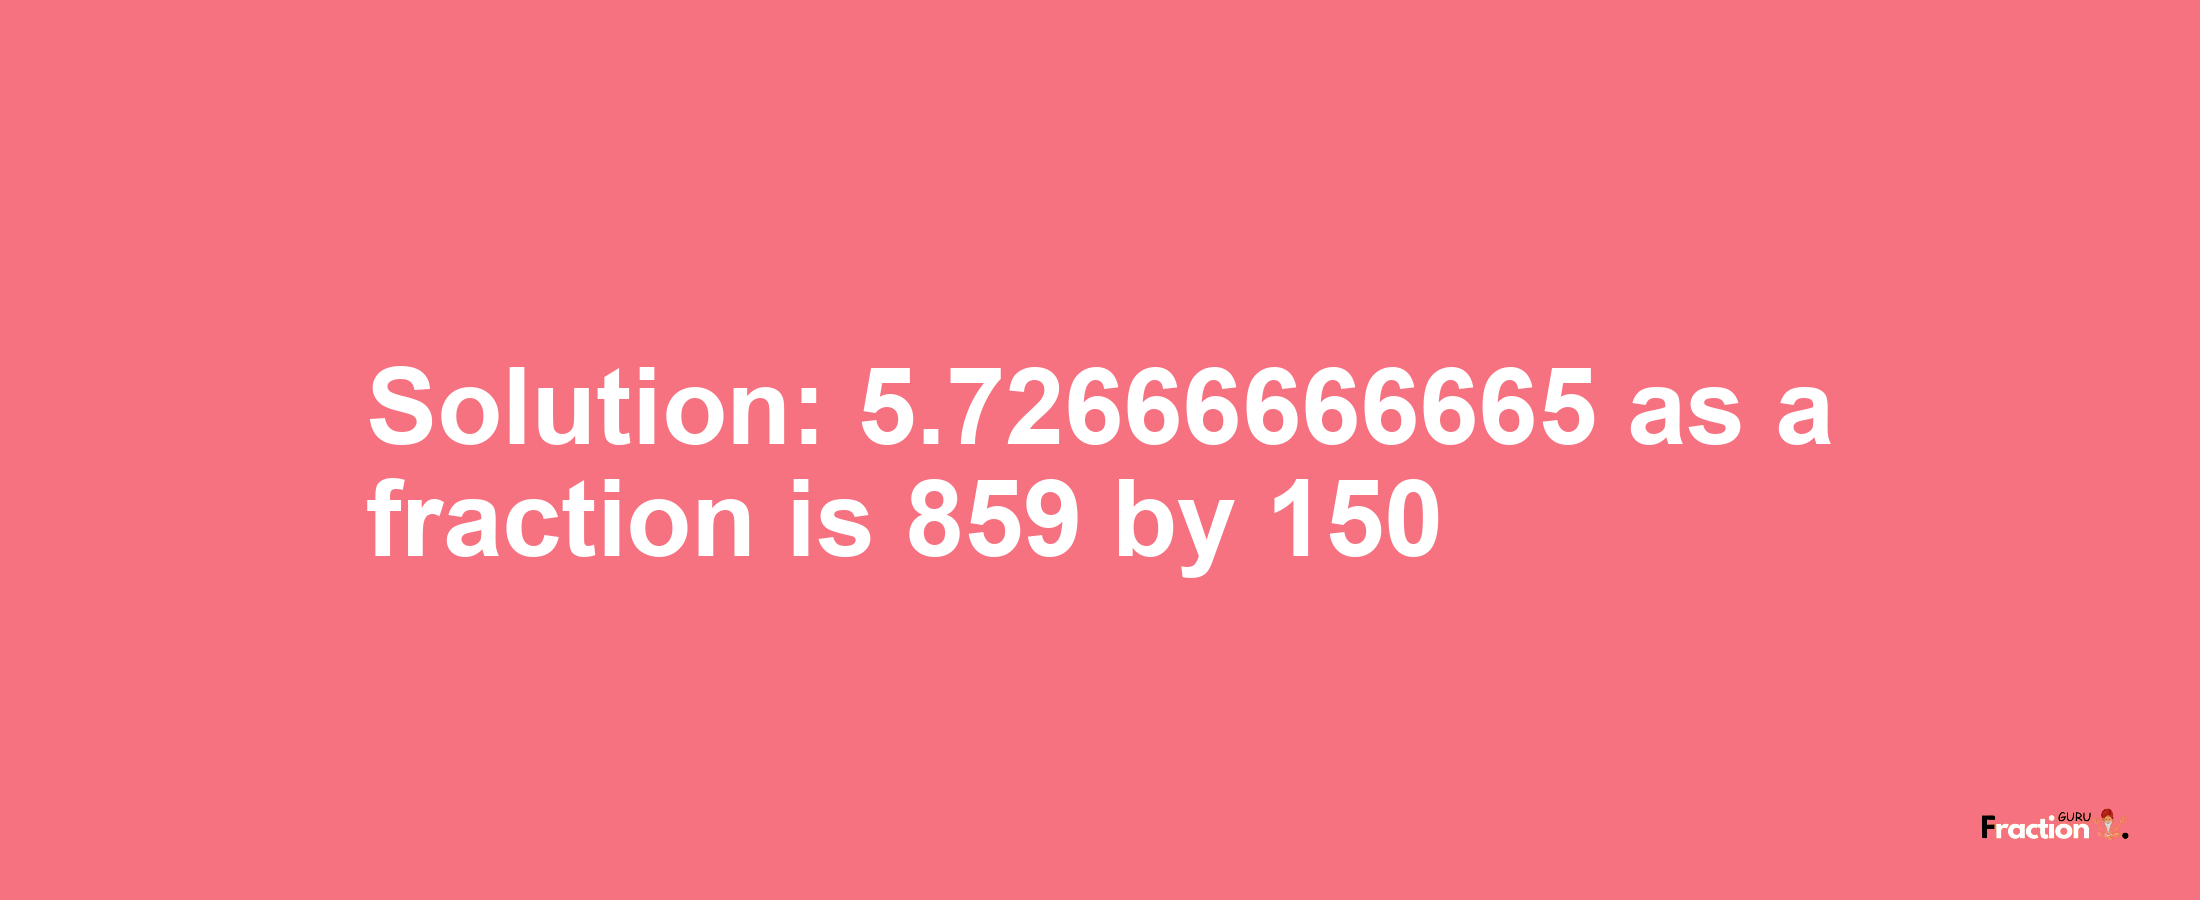 Solution:5.72666666665 as a fraction is 859/150